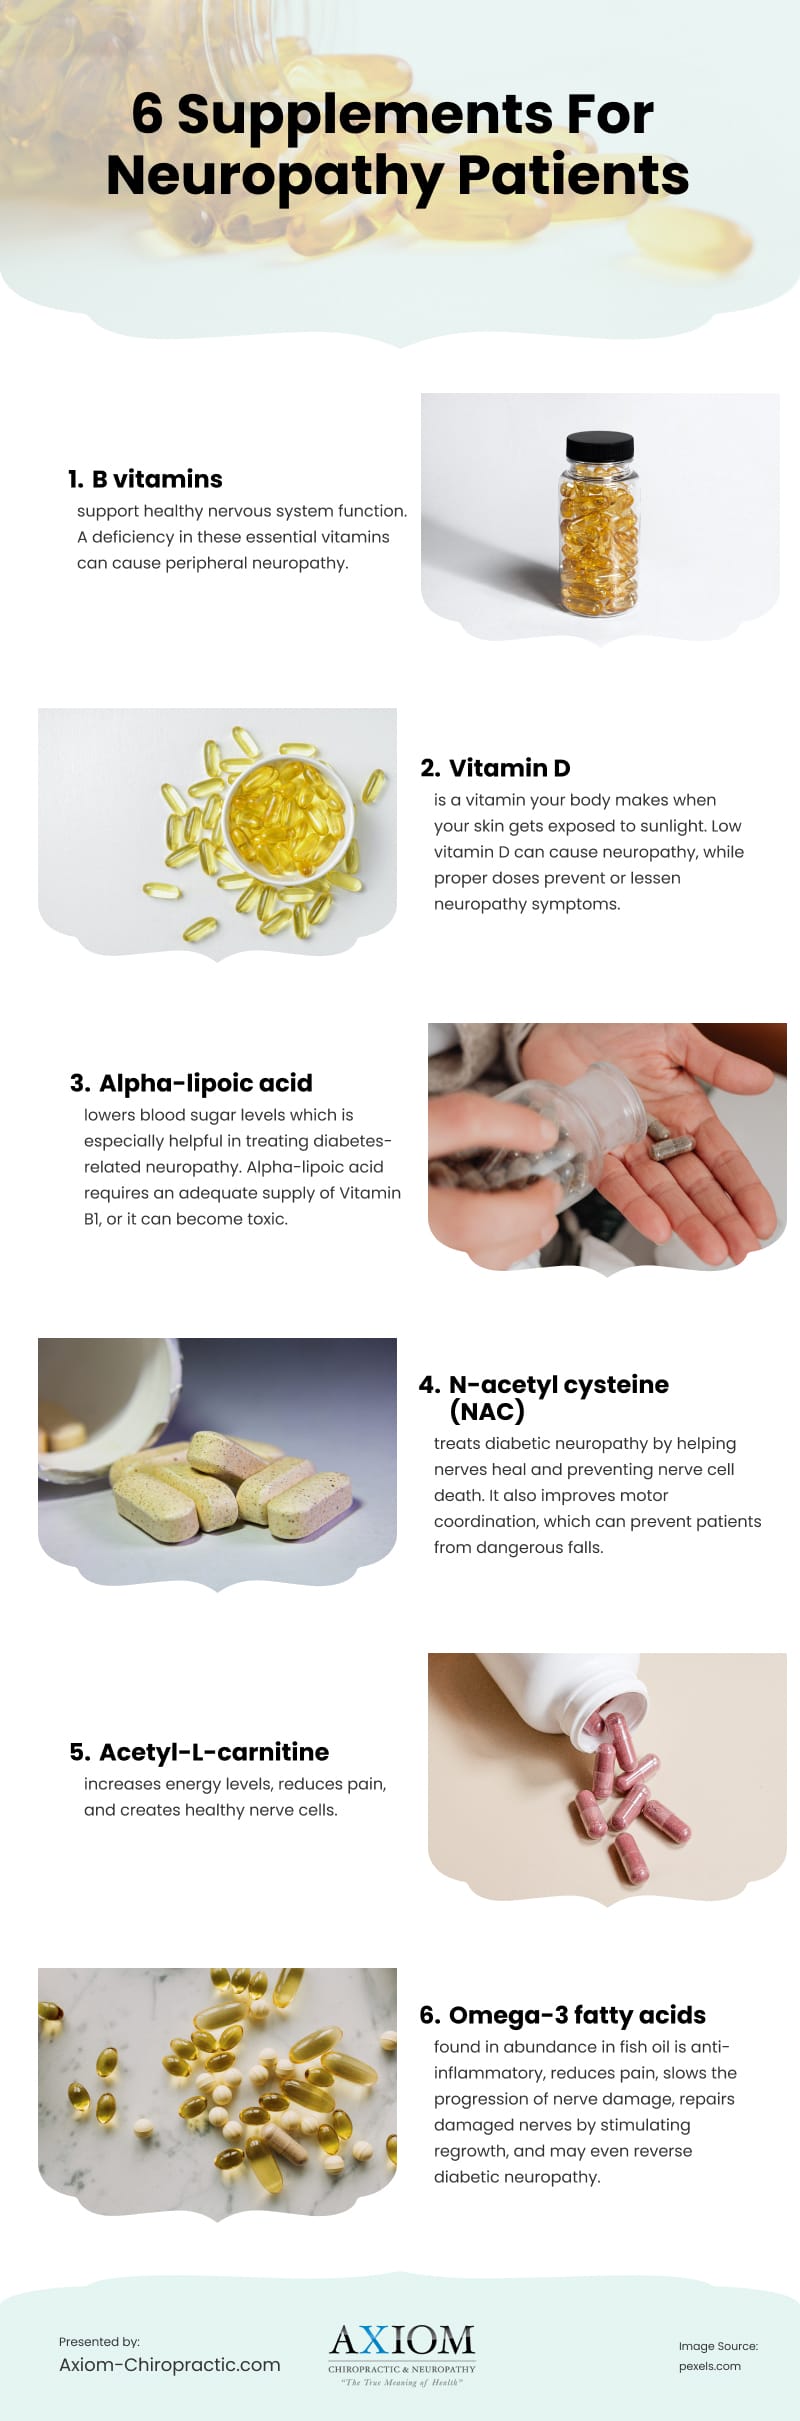 6 Supplements For Neuropathy Patients Infographic